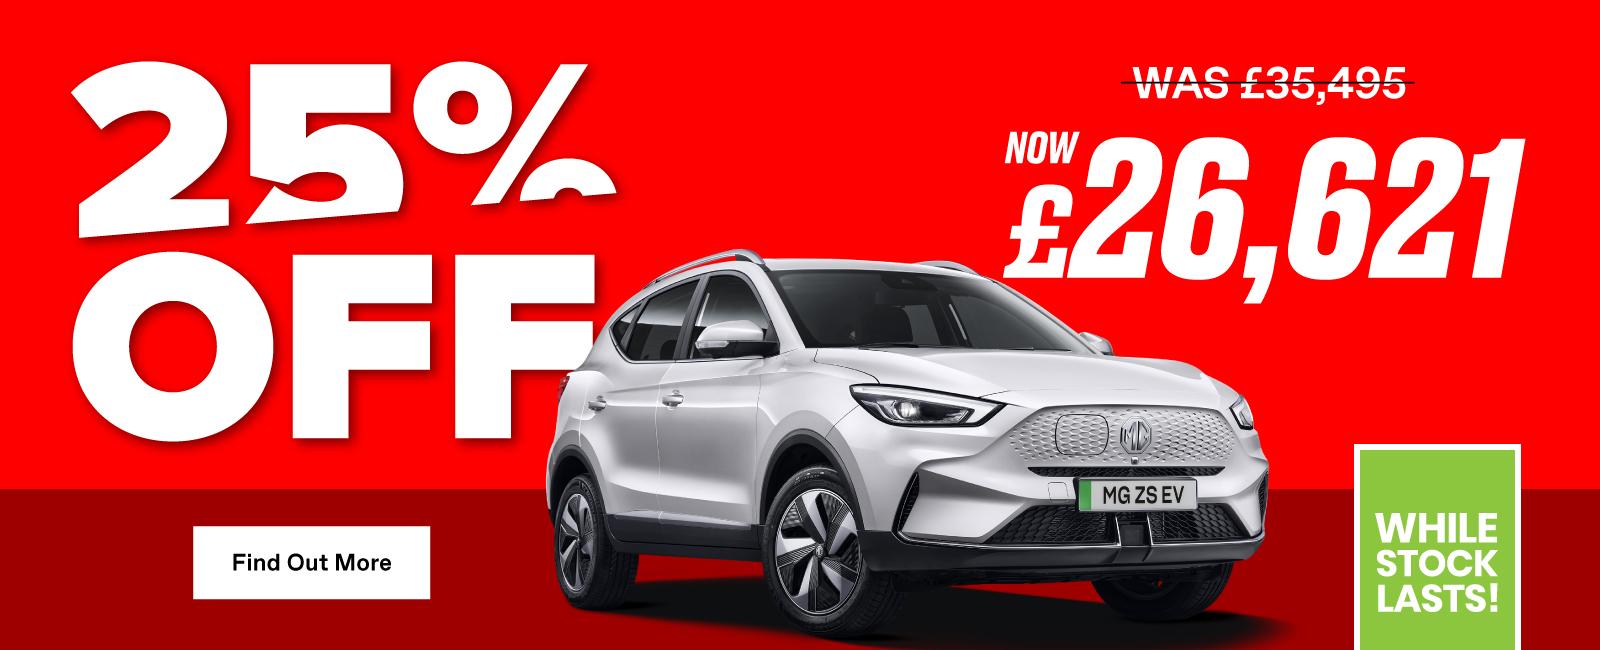 For a limited time, you can save up to £8,874 off the MG ZS EV while stocks last!